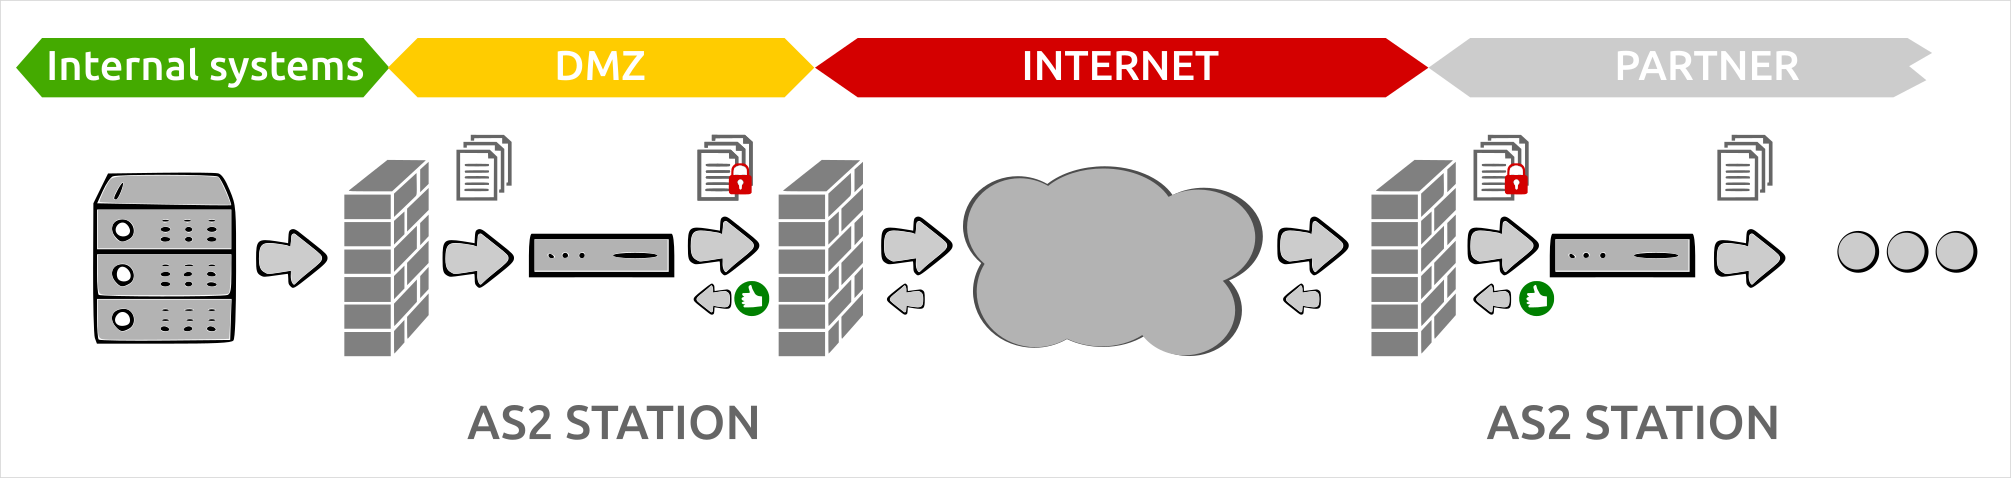 Illustration of AS2 system in general IT environment